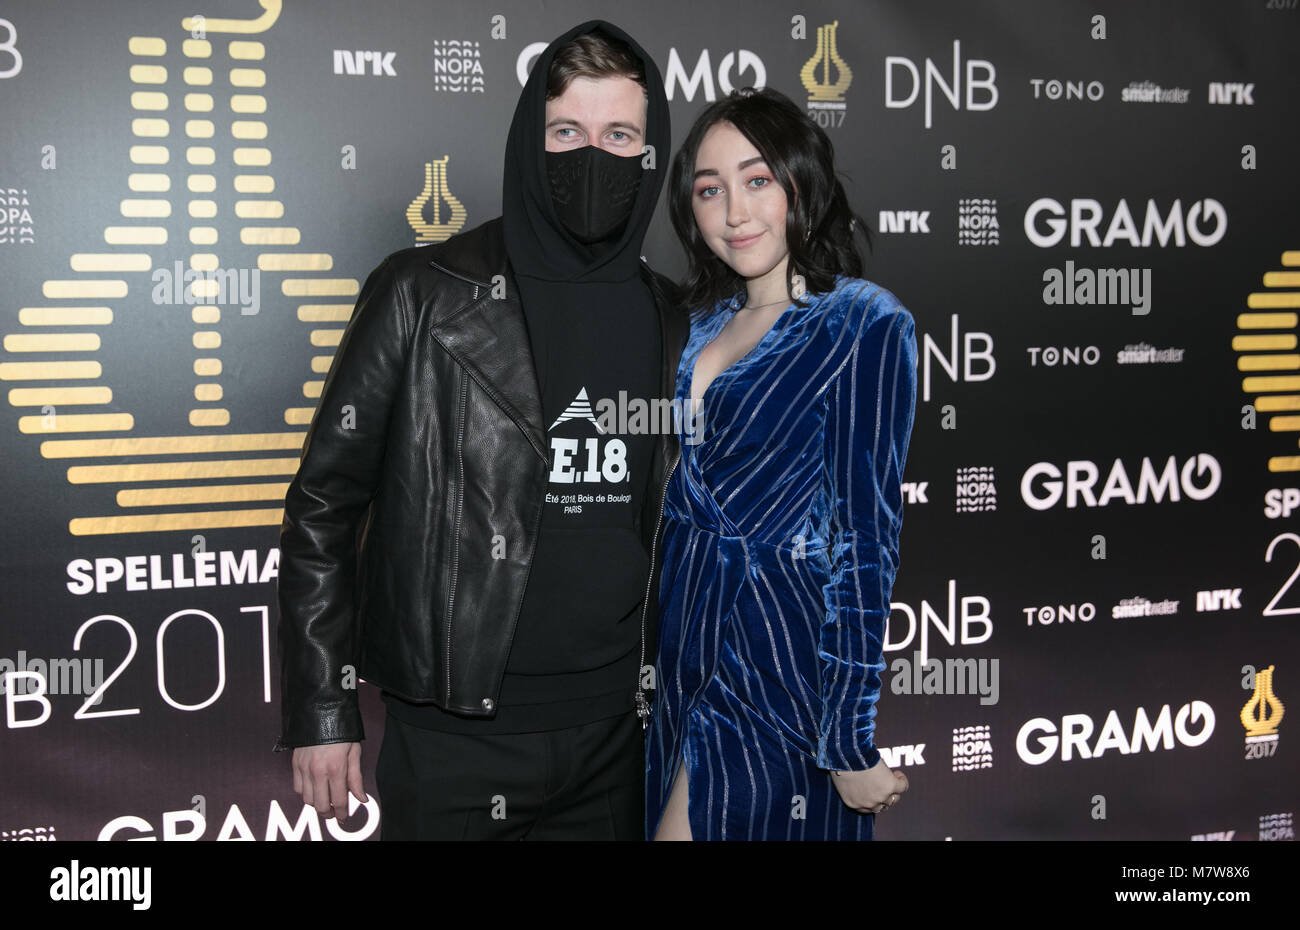 Norway, Oslo - February 25, 2018. The Norwegian record producer Alan Walker and American singer Noah Cyrus are seen at the red carpet at the Norwegian Grammy Awards, Spellemannprisen 2017, in Oslo. (Photo credit: Gonzales Photo - Stian S. Moller). Stock Photo